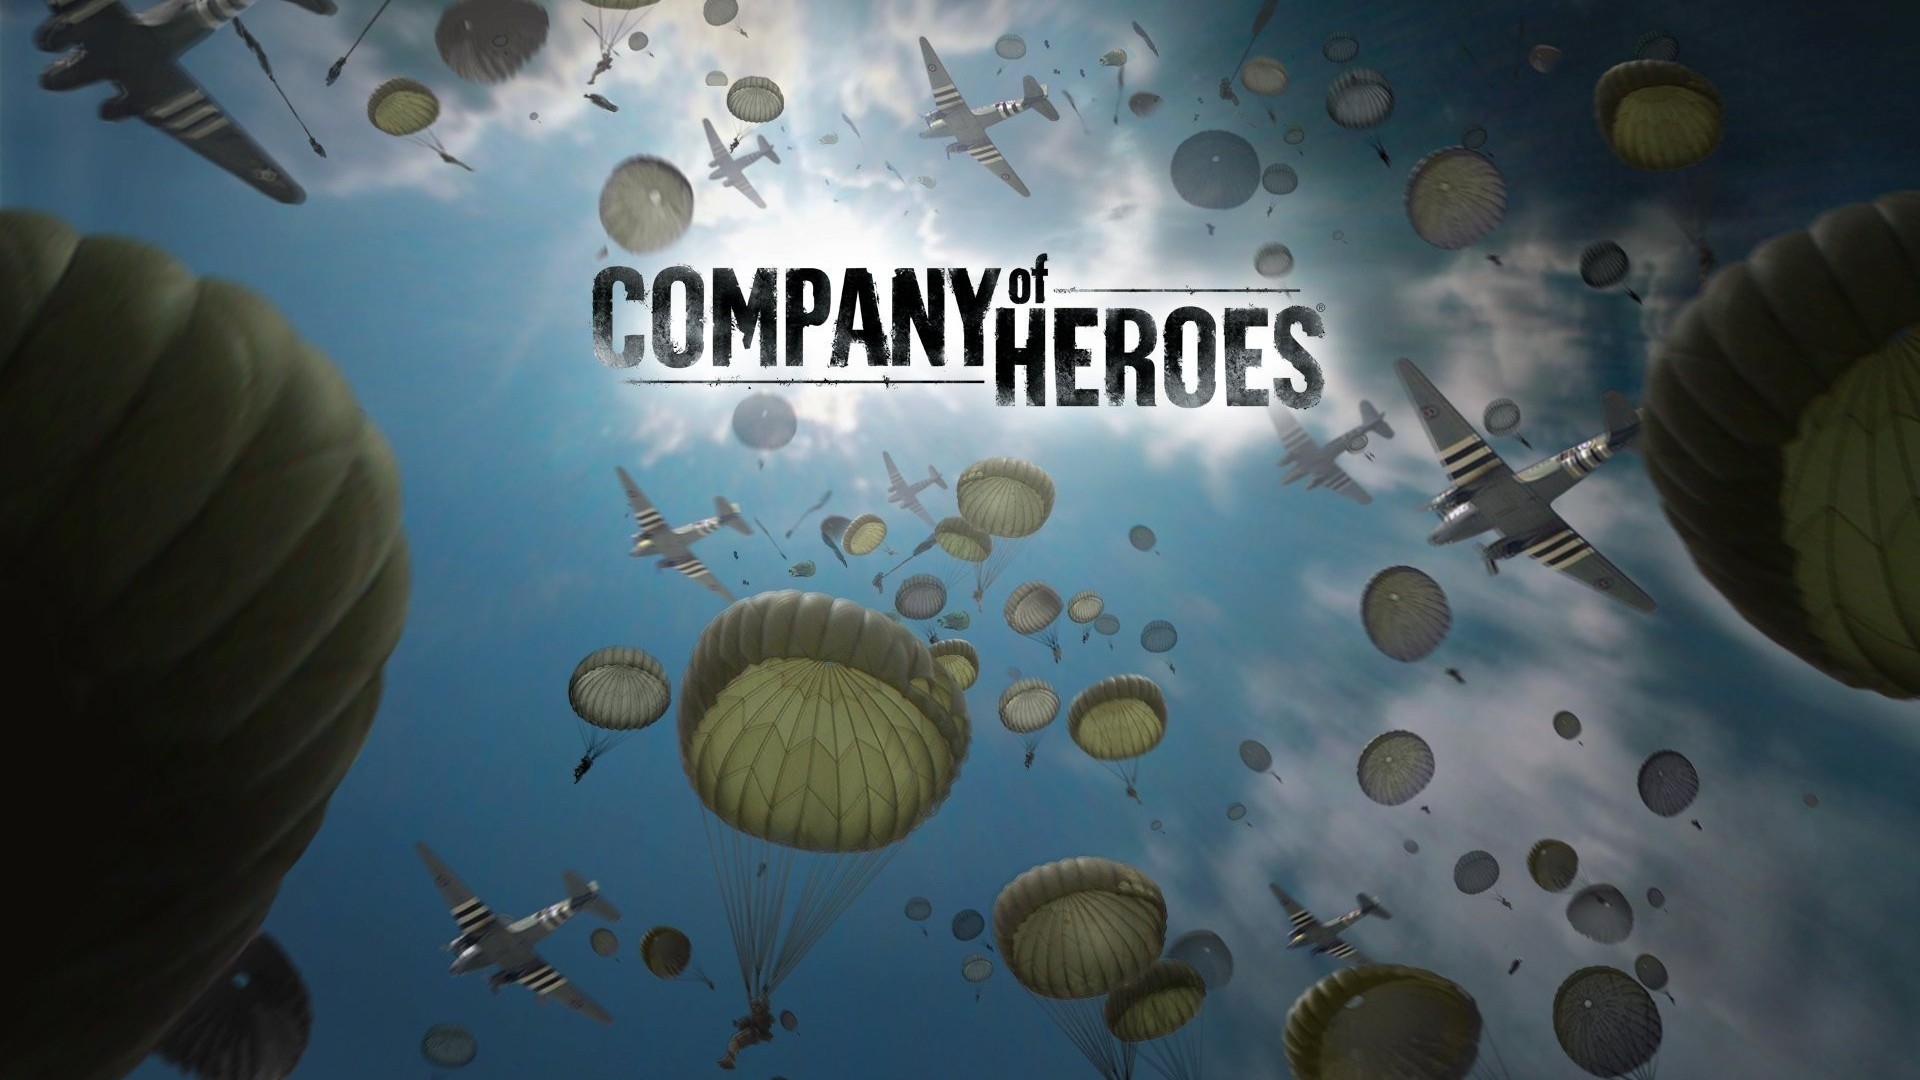 Company of Heroes for 1920 x 1080 HDTV 1080p resolution